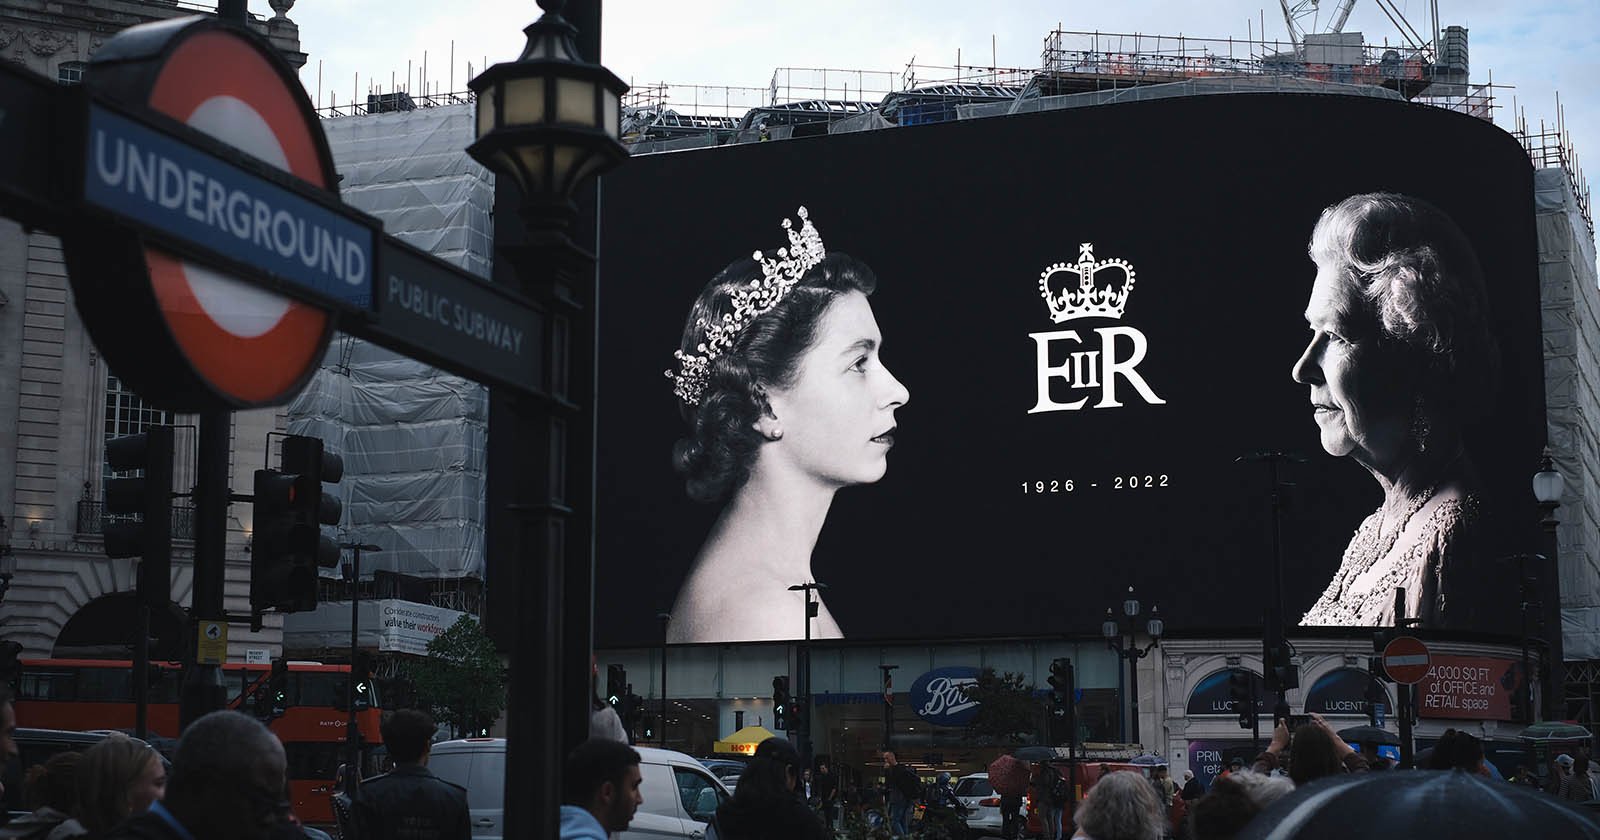  queen elizabeth capturing world most photographed woman 